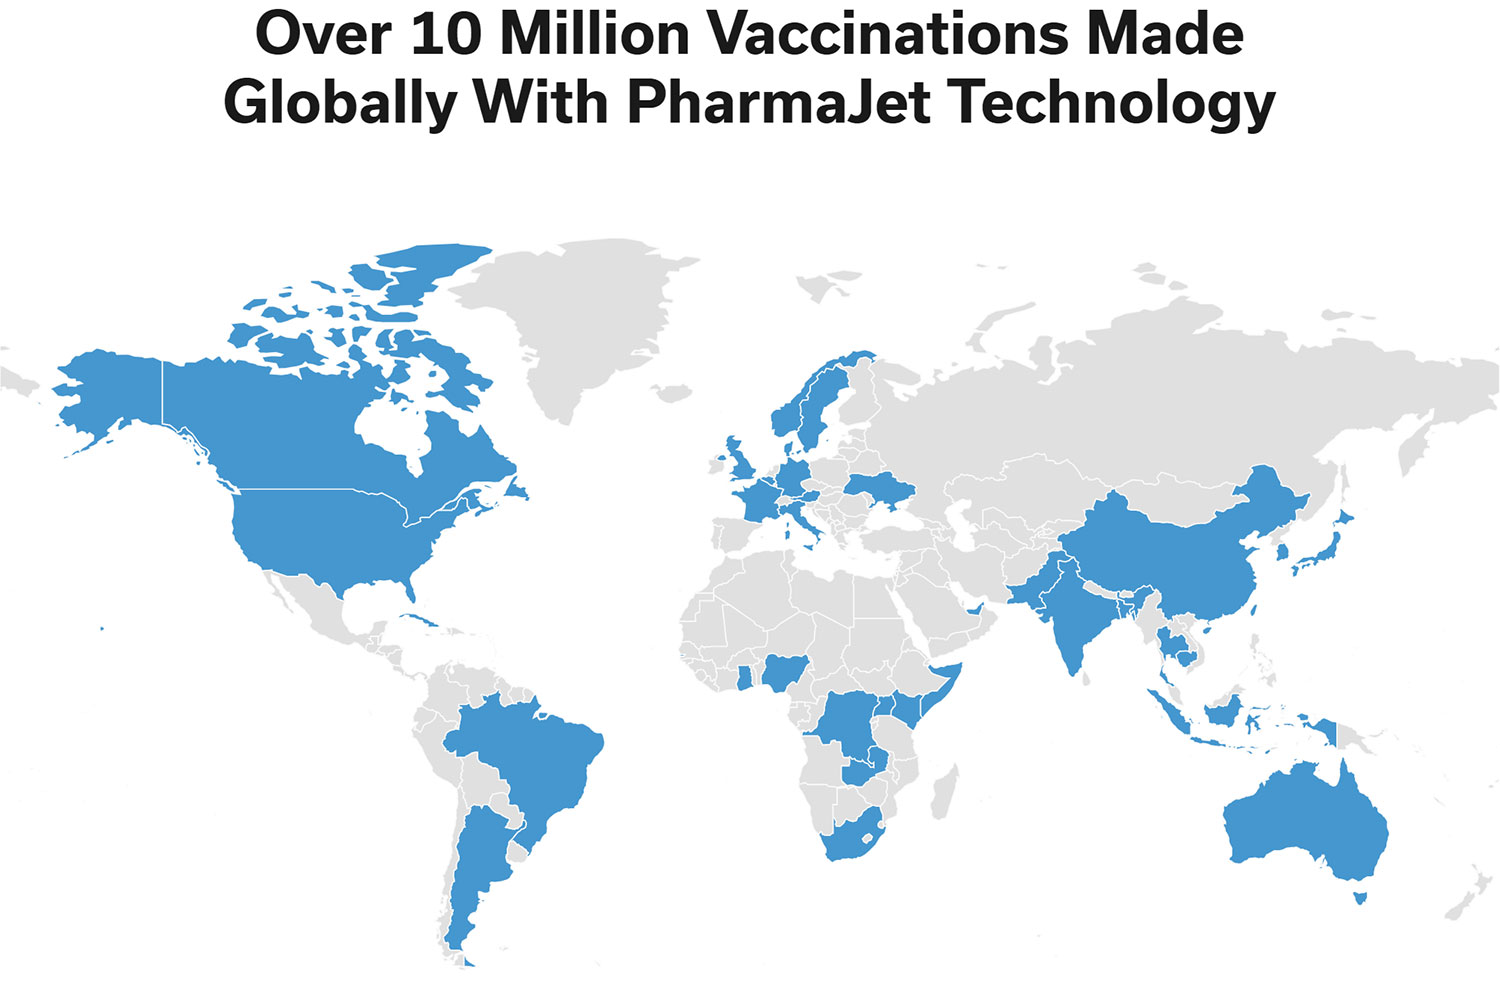 Over 10 Million Vaccinations Made Globally with PharmaJet Technology